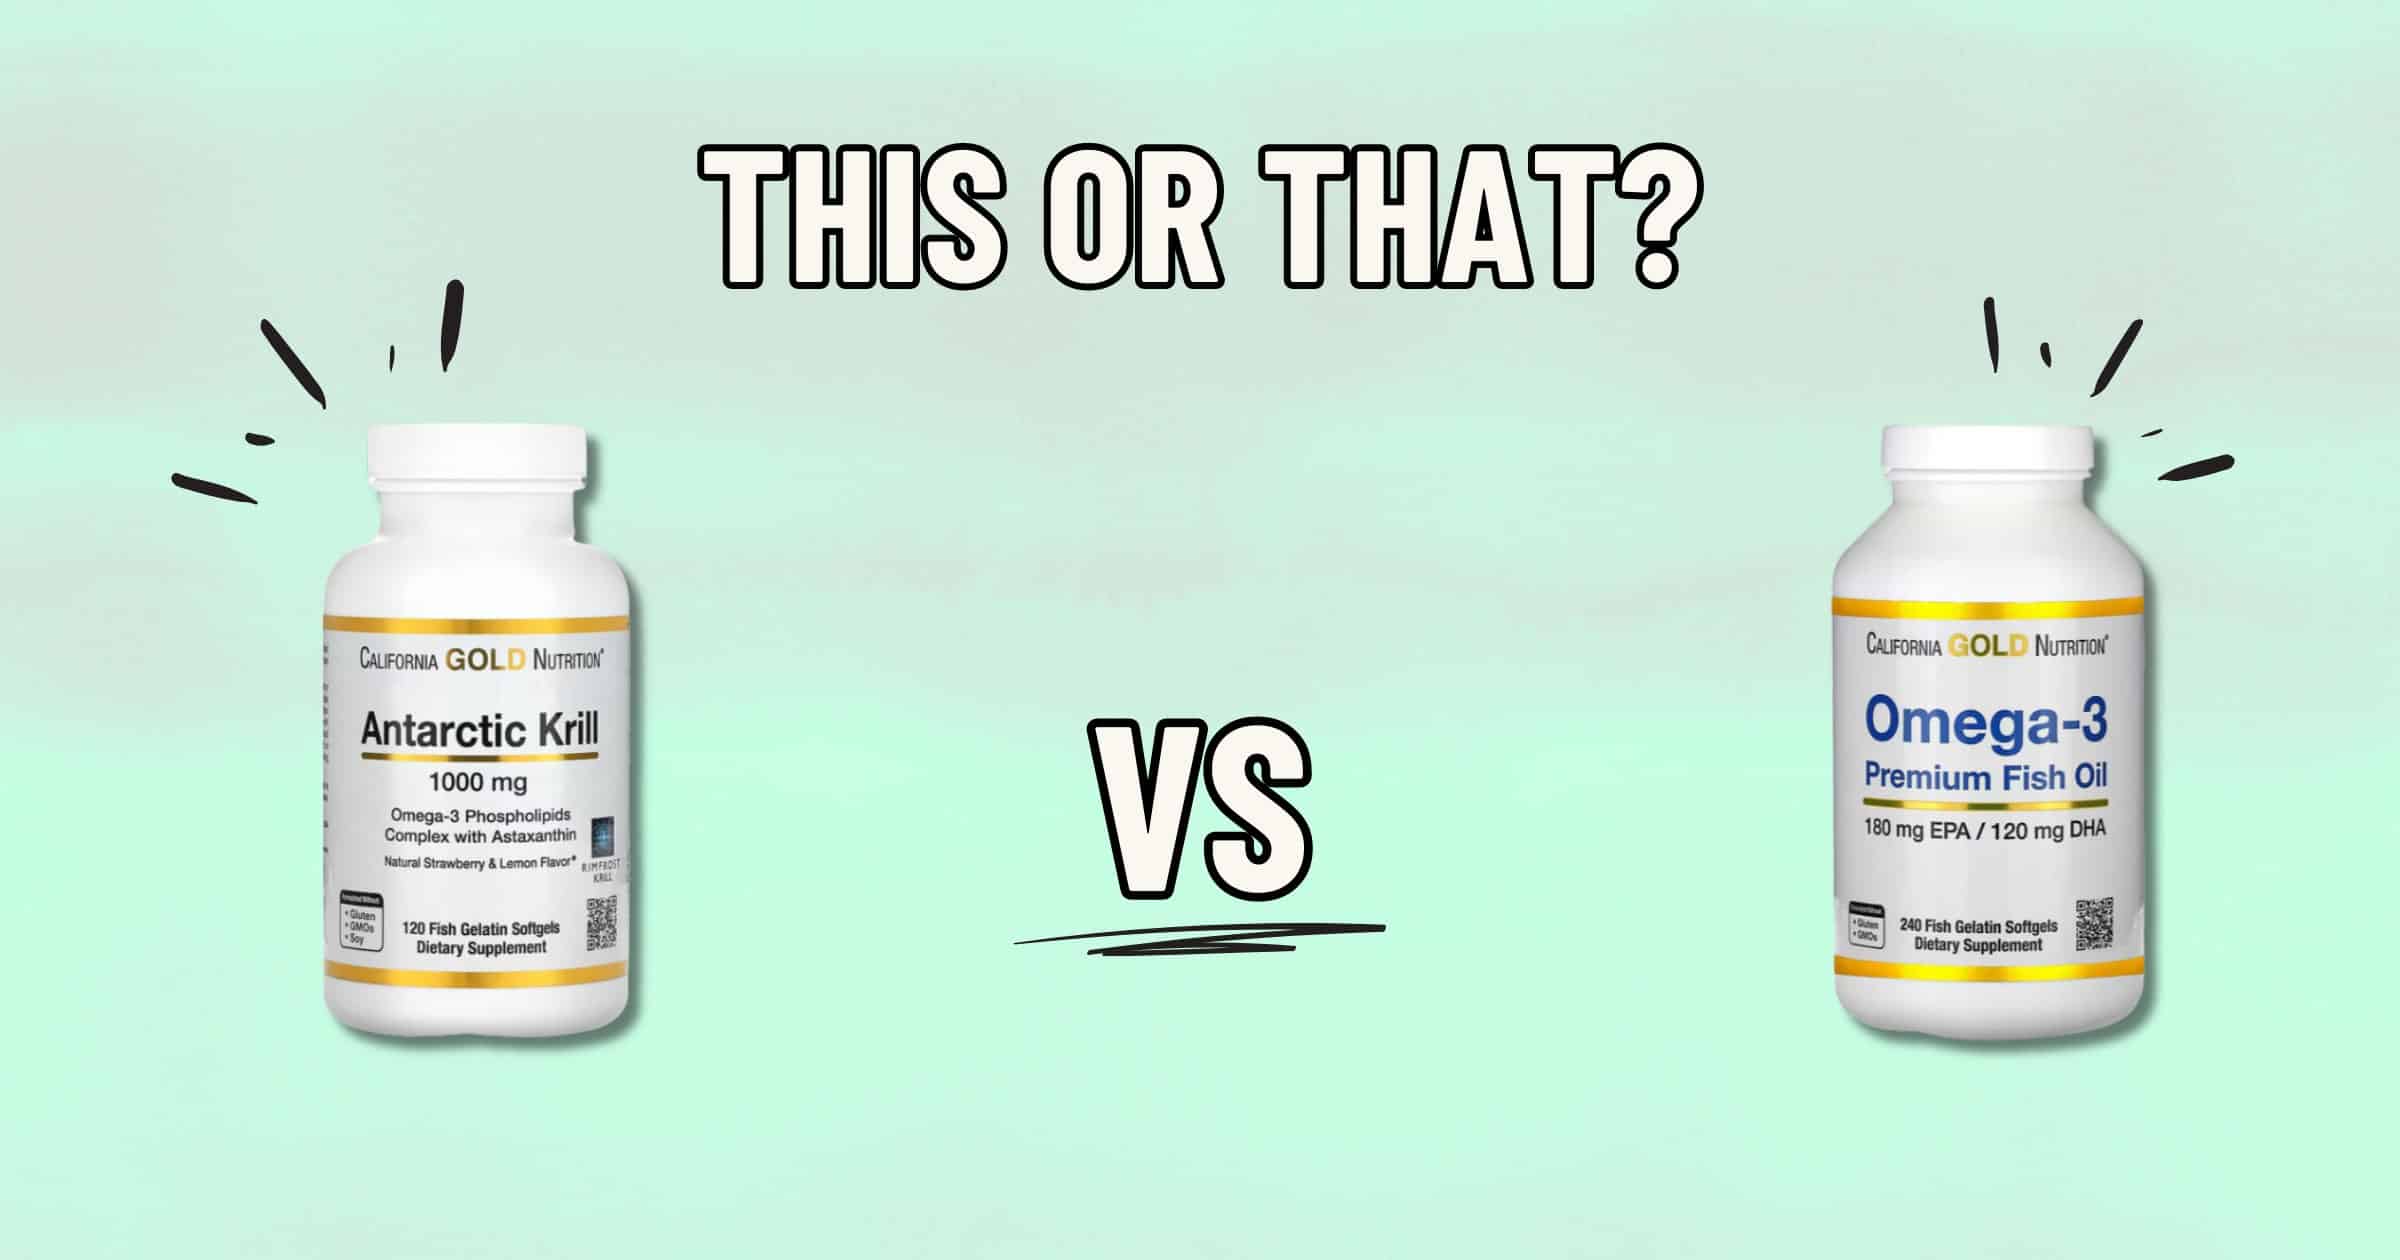 Image displaying two supplement bottles with the text "THIS OR THAT?" at the top and "VS" in the center. The bottle on the left is labeled "Antarctic Krill Oil" and the one on the right is labeled "Omega-3 Premium Fish Oil." Both bottles are from California Gold Nutrition. Which is healthier?